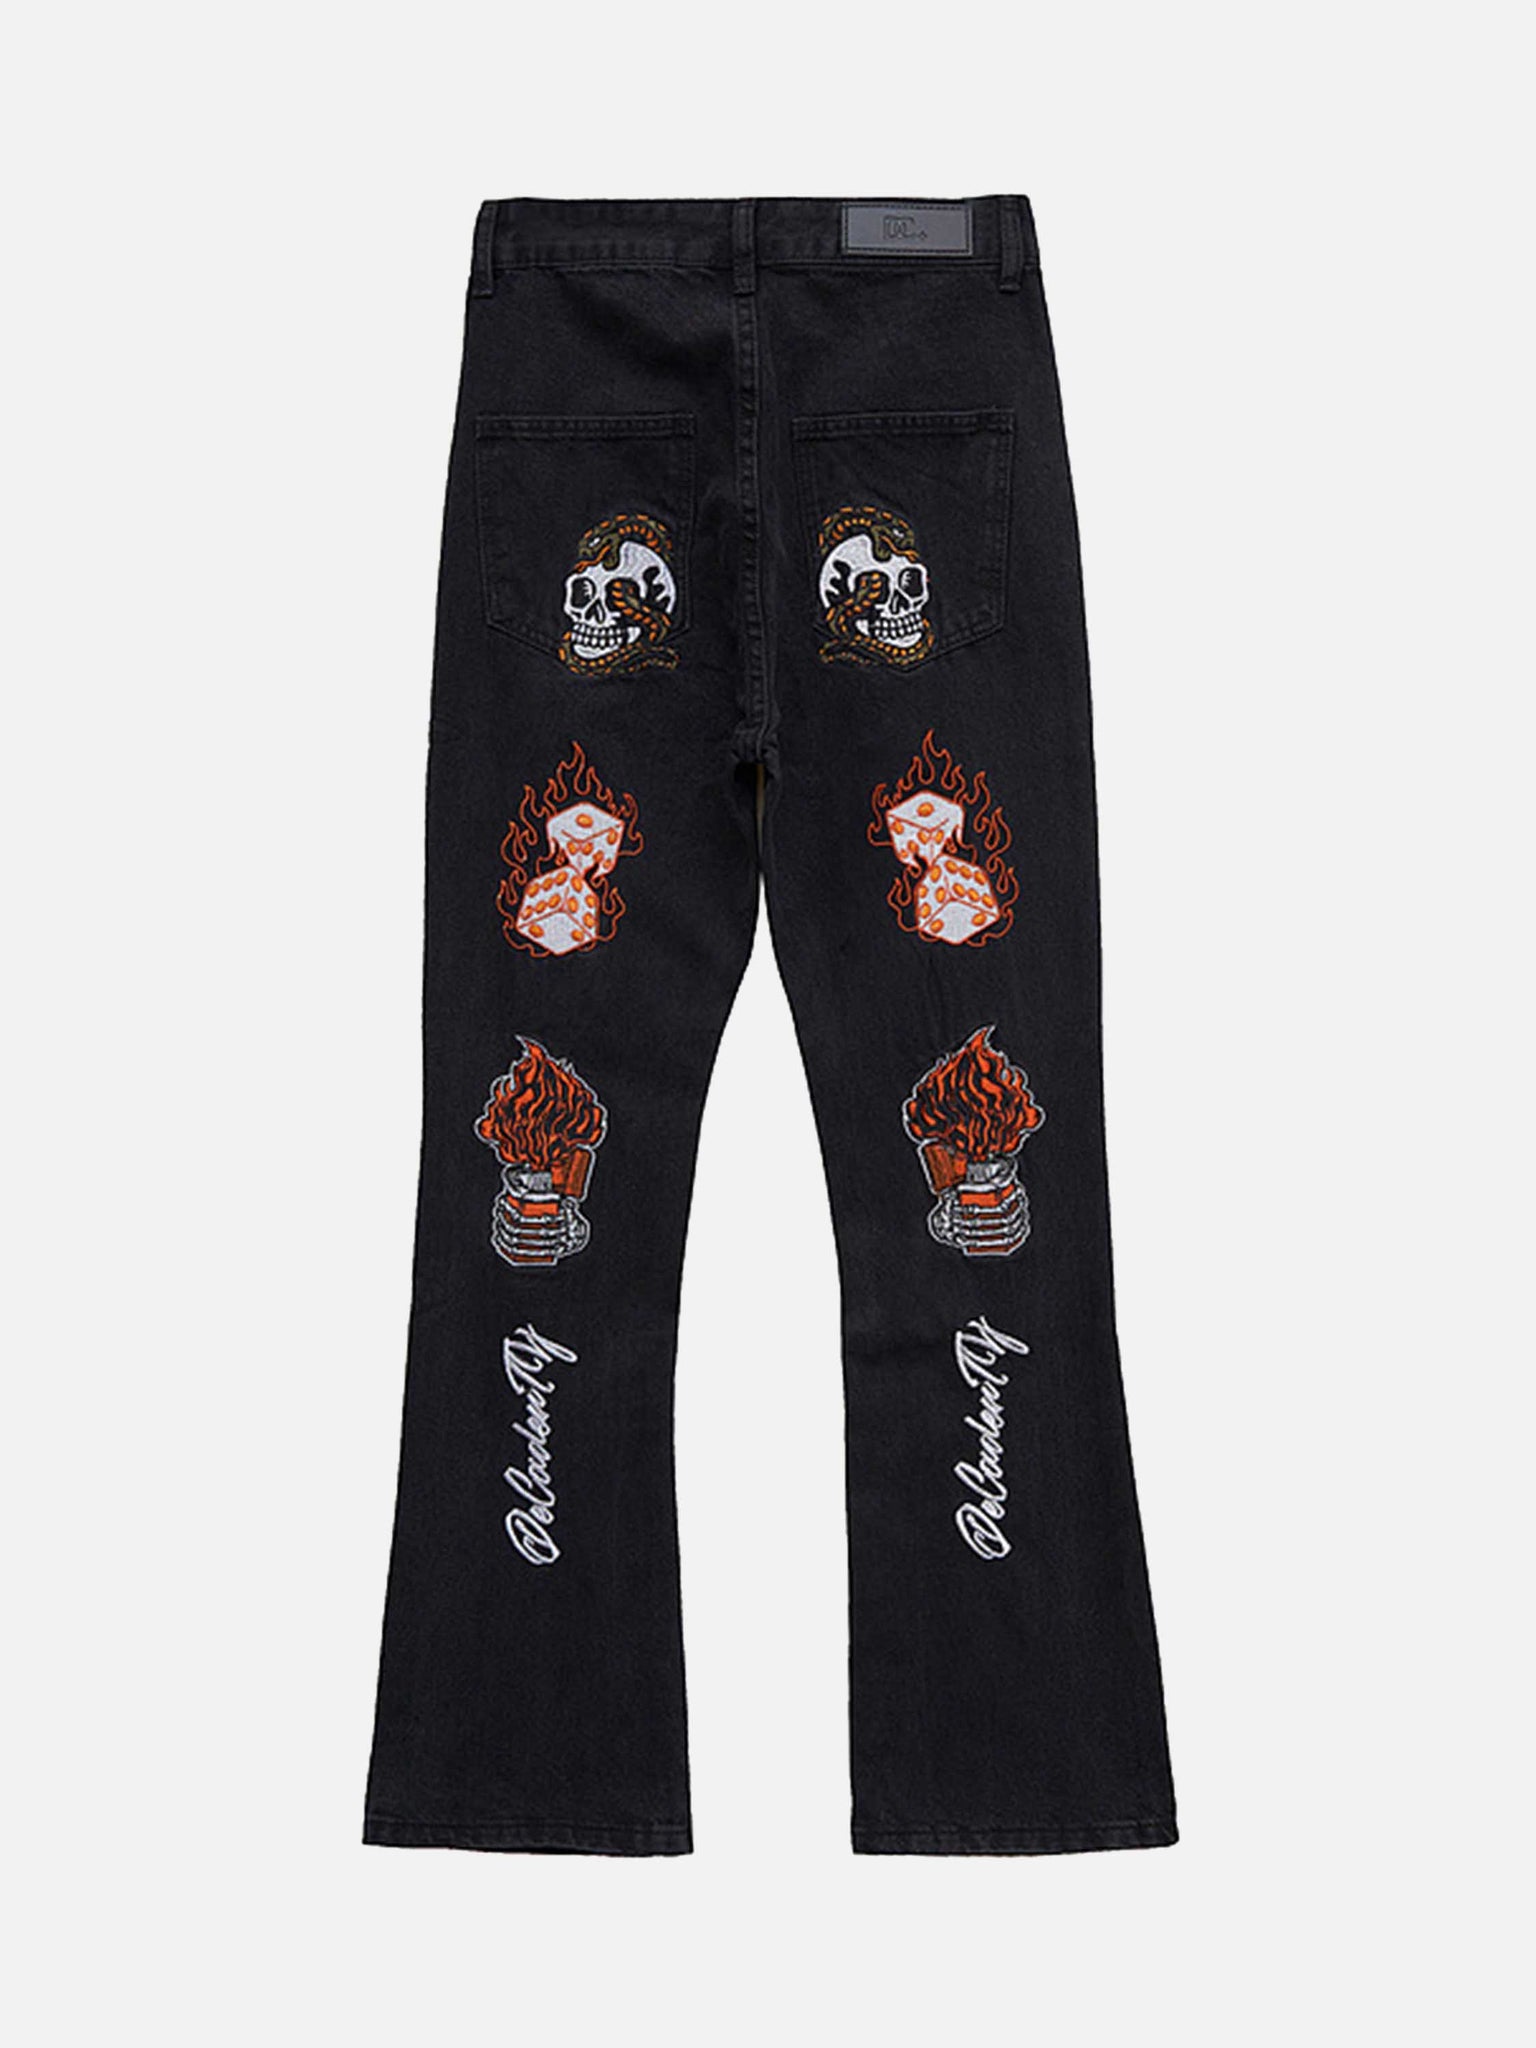 The Supermade High Street Embroidery Retro Jeans